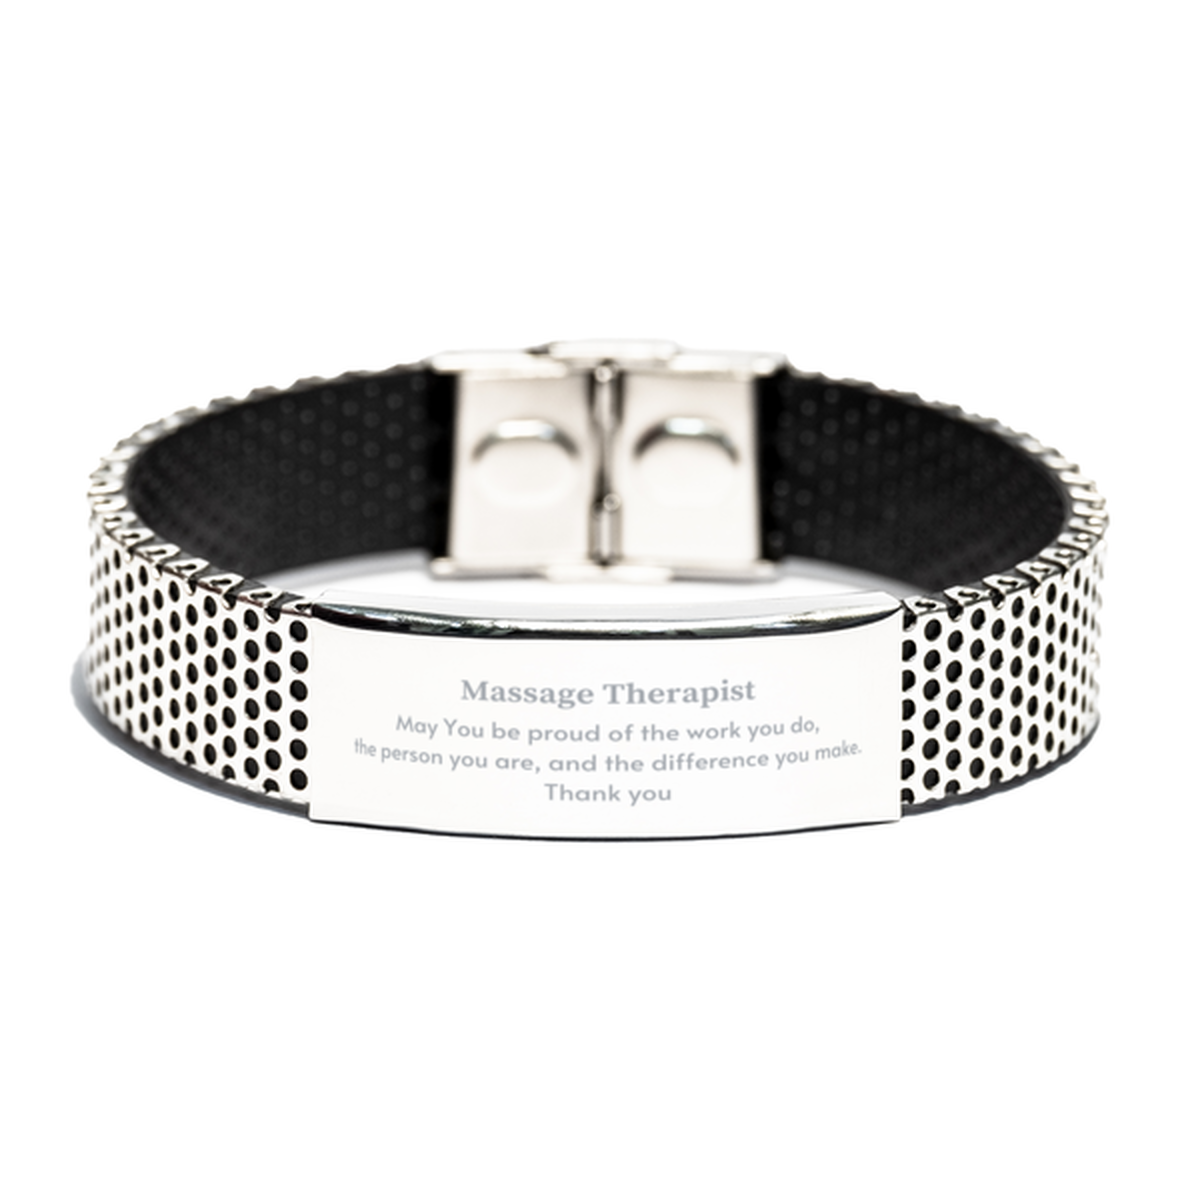 Heartwarming Stainless Steel Bracelet Retirement Coworkers Gifts for Massage Therapist, Massage Therapist May You be proud of the work you do, the person you are Gifts for Boss Men Women Friends